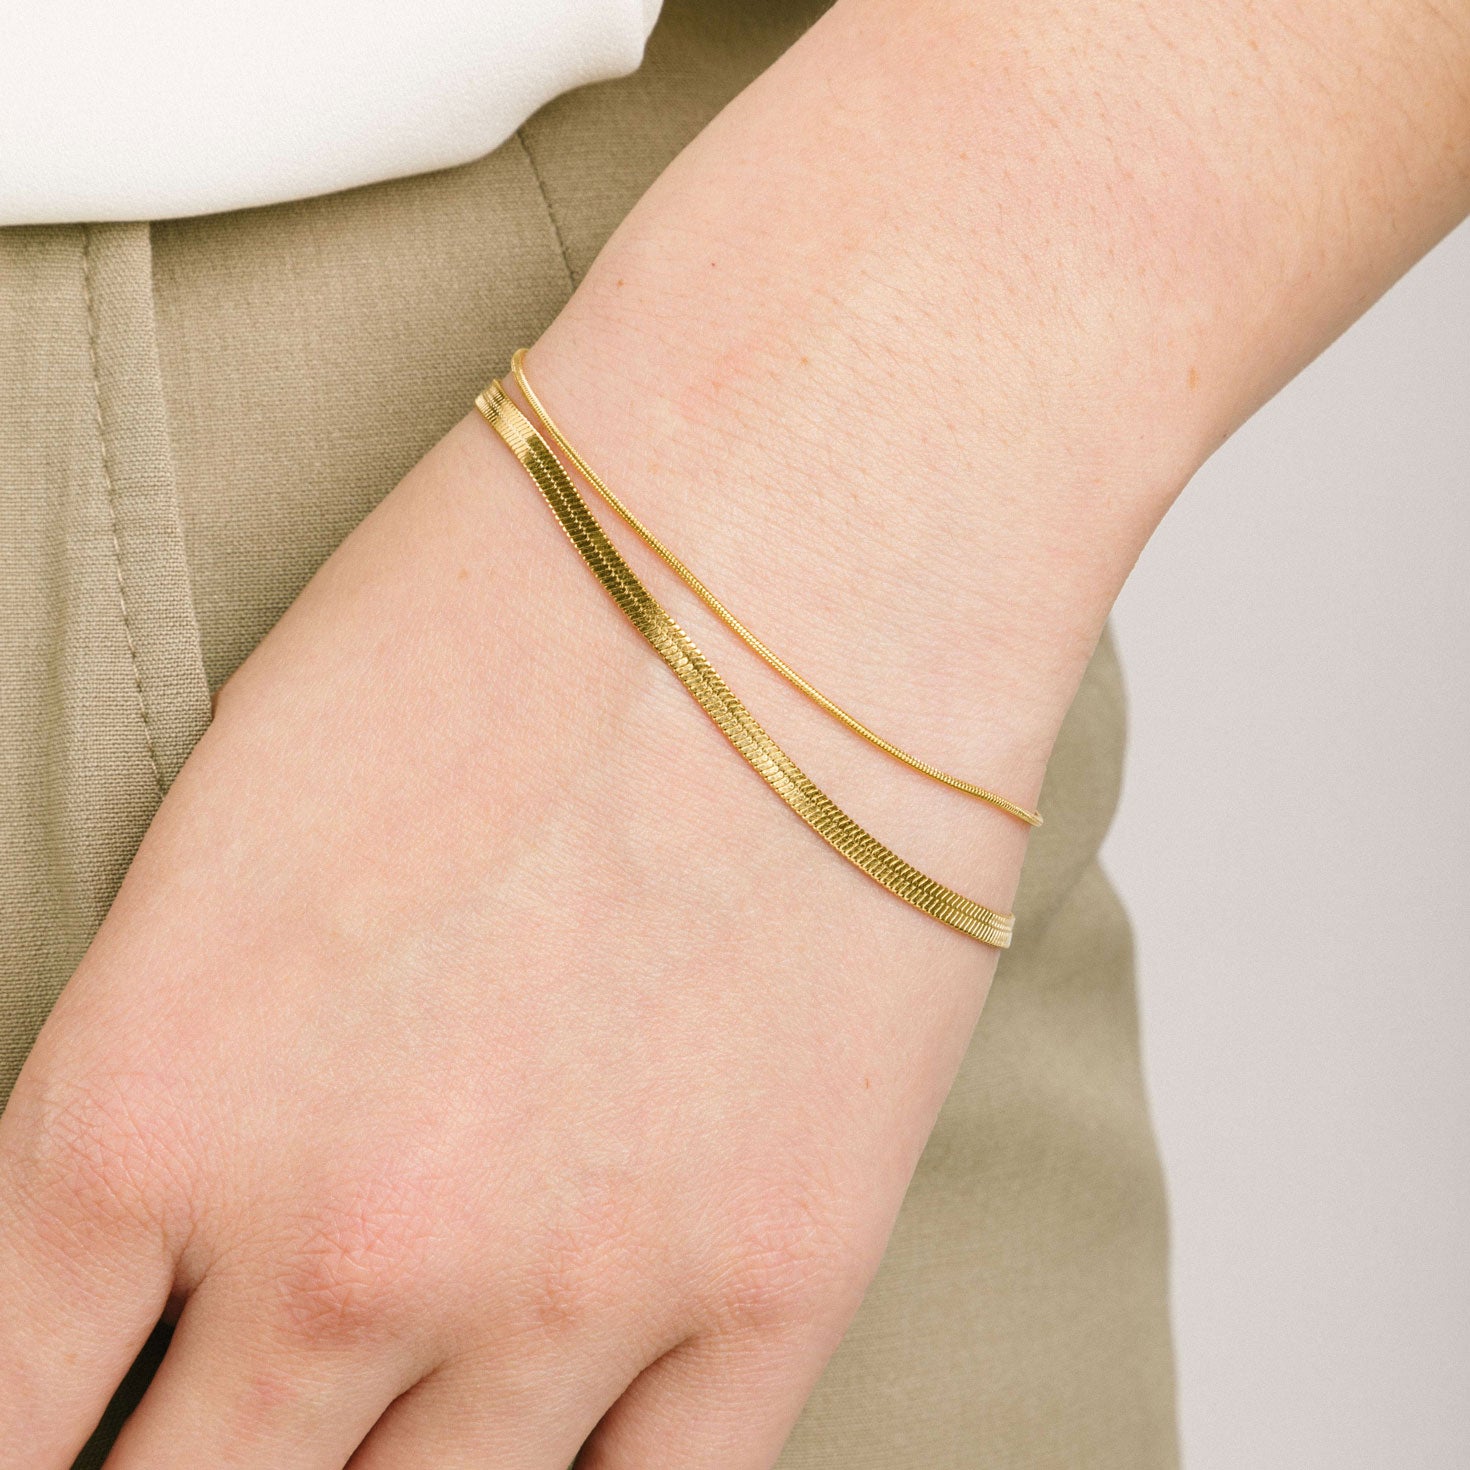 A model wearing the Double Layered Bracelet is crafted from 14K gold plated stainless steel for outstanding durability and a non-tarnish, water-resistant, allergy-free and antioxidant finish. Plus, its adjustable design ensures a perfect fit for any wrist.